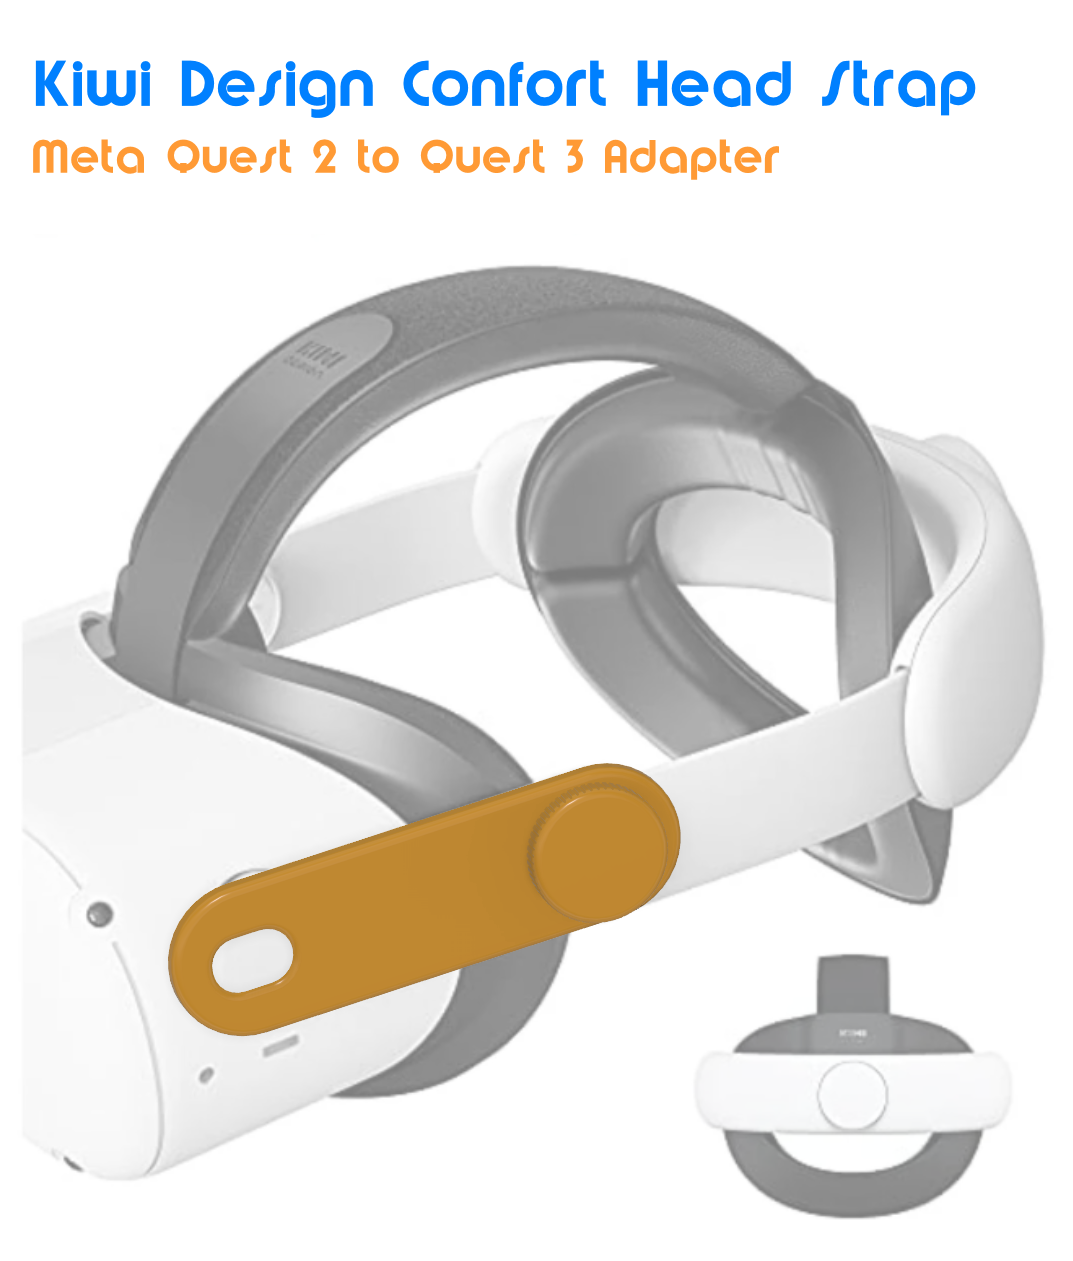  iovroigo Adapter Kit for KIWI Head Strap Compatible with Quest 3  Accessories (Not 3D Printed, Not Include The Head Strap or Quest 3) : Video  Games